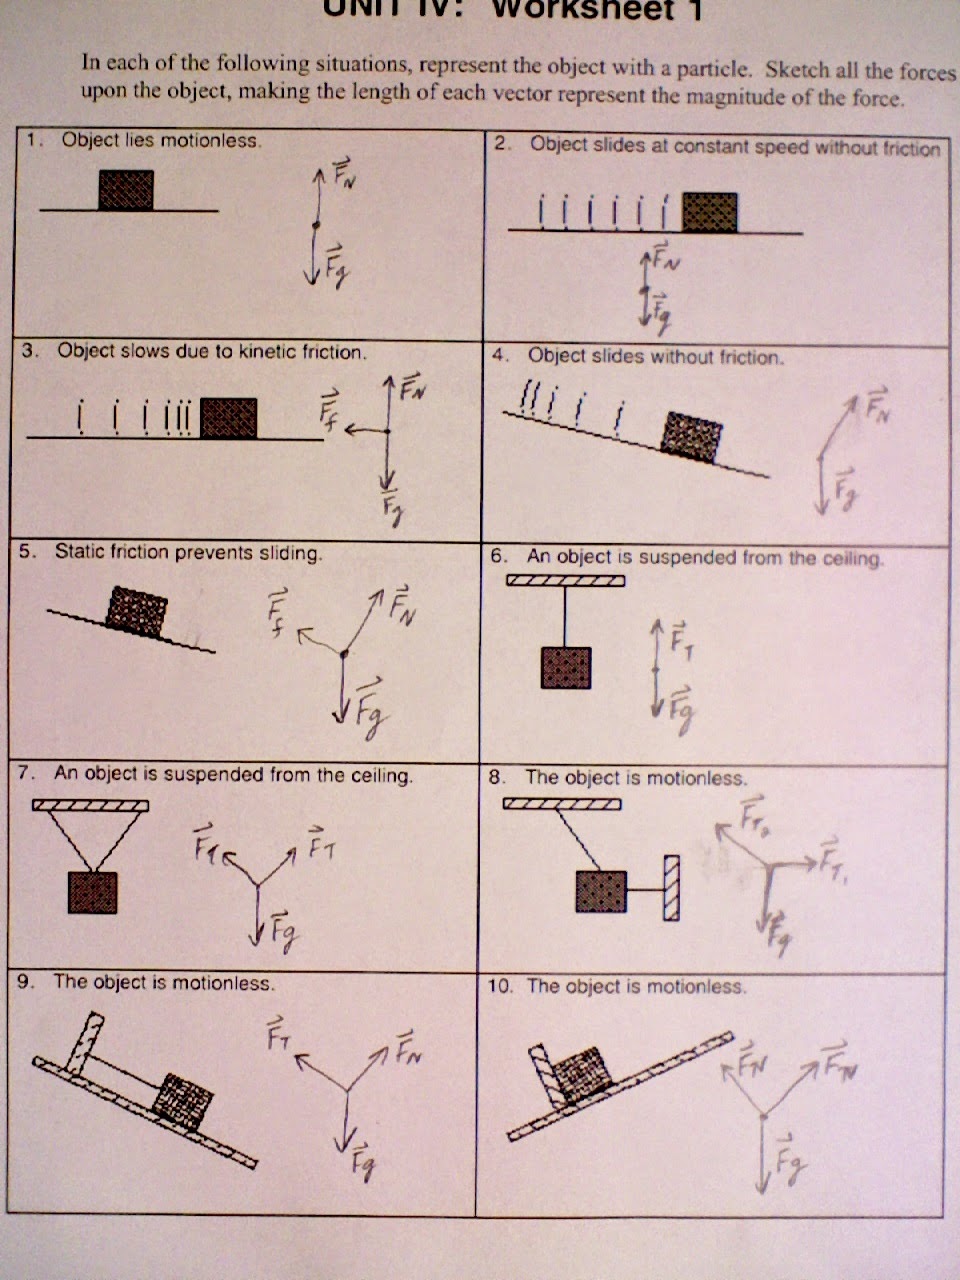 Worksheet 2 Drawing Force Diagrams Answers